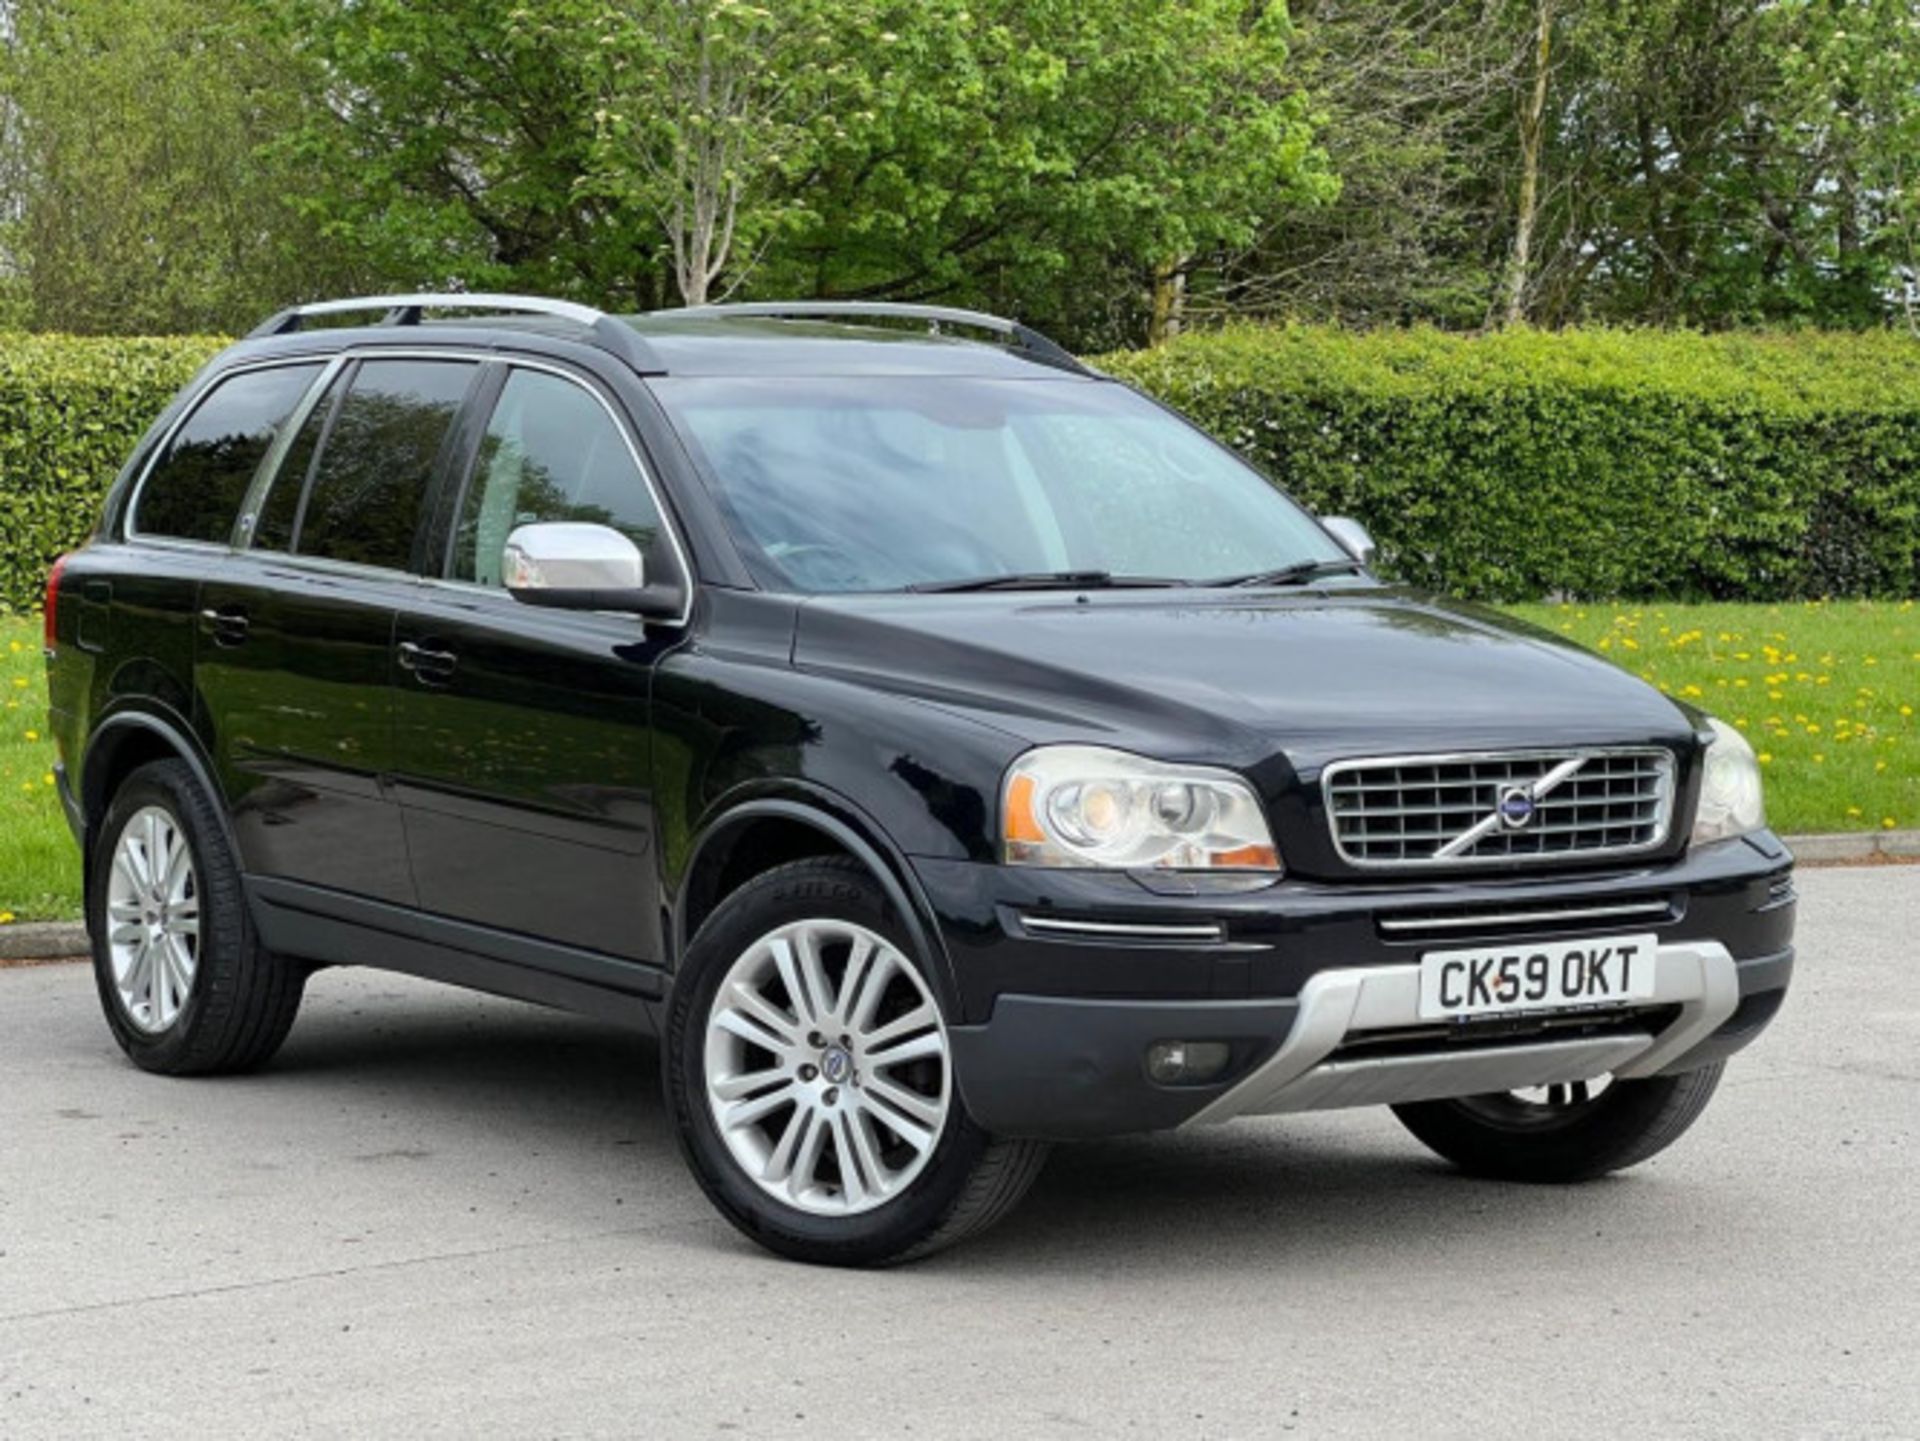 VOLVO XC90 2.4 D5 EXECUTIVE GEARTRONIC AWD, 5DR >>--NO VAT ON HAMMER--<<